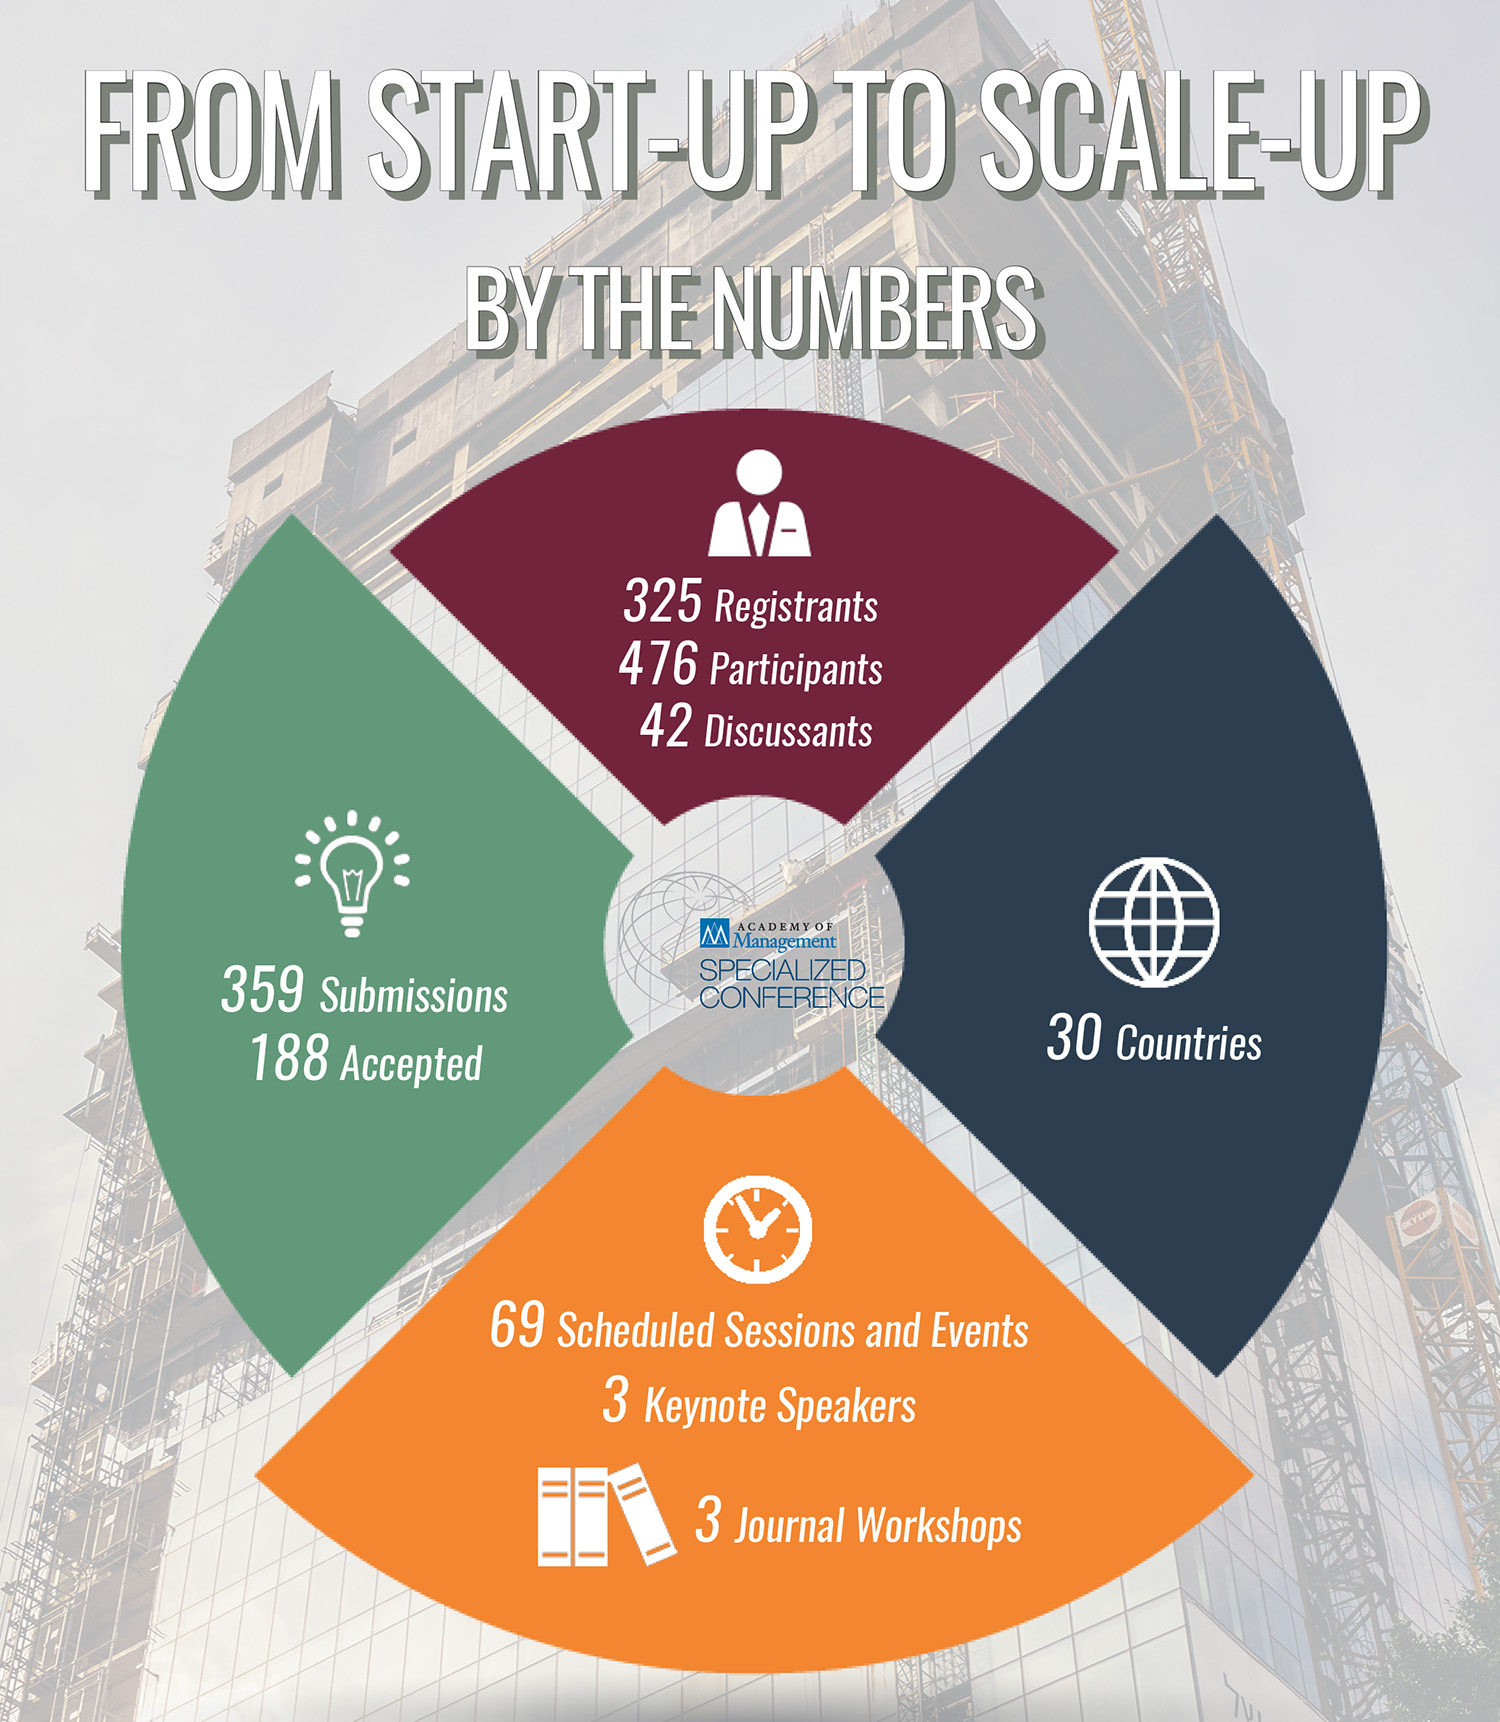 Start-up 2 Scale-up 2018 Conference Stats